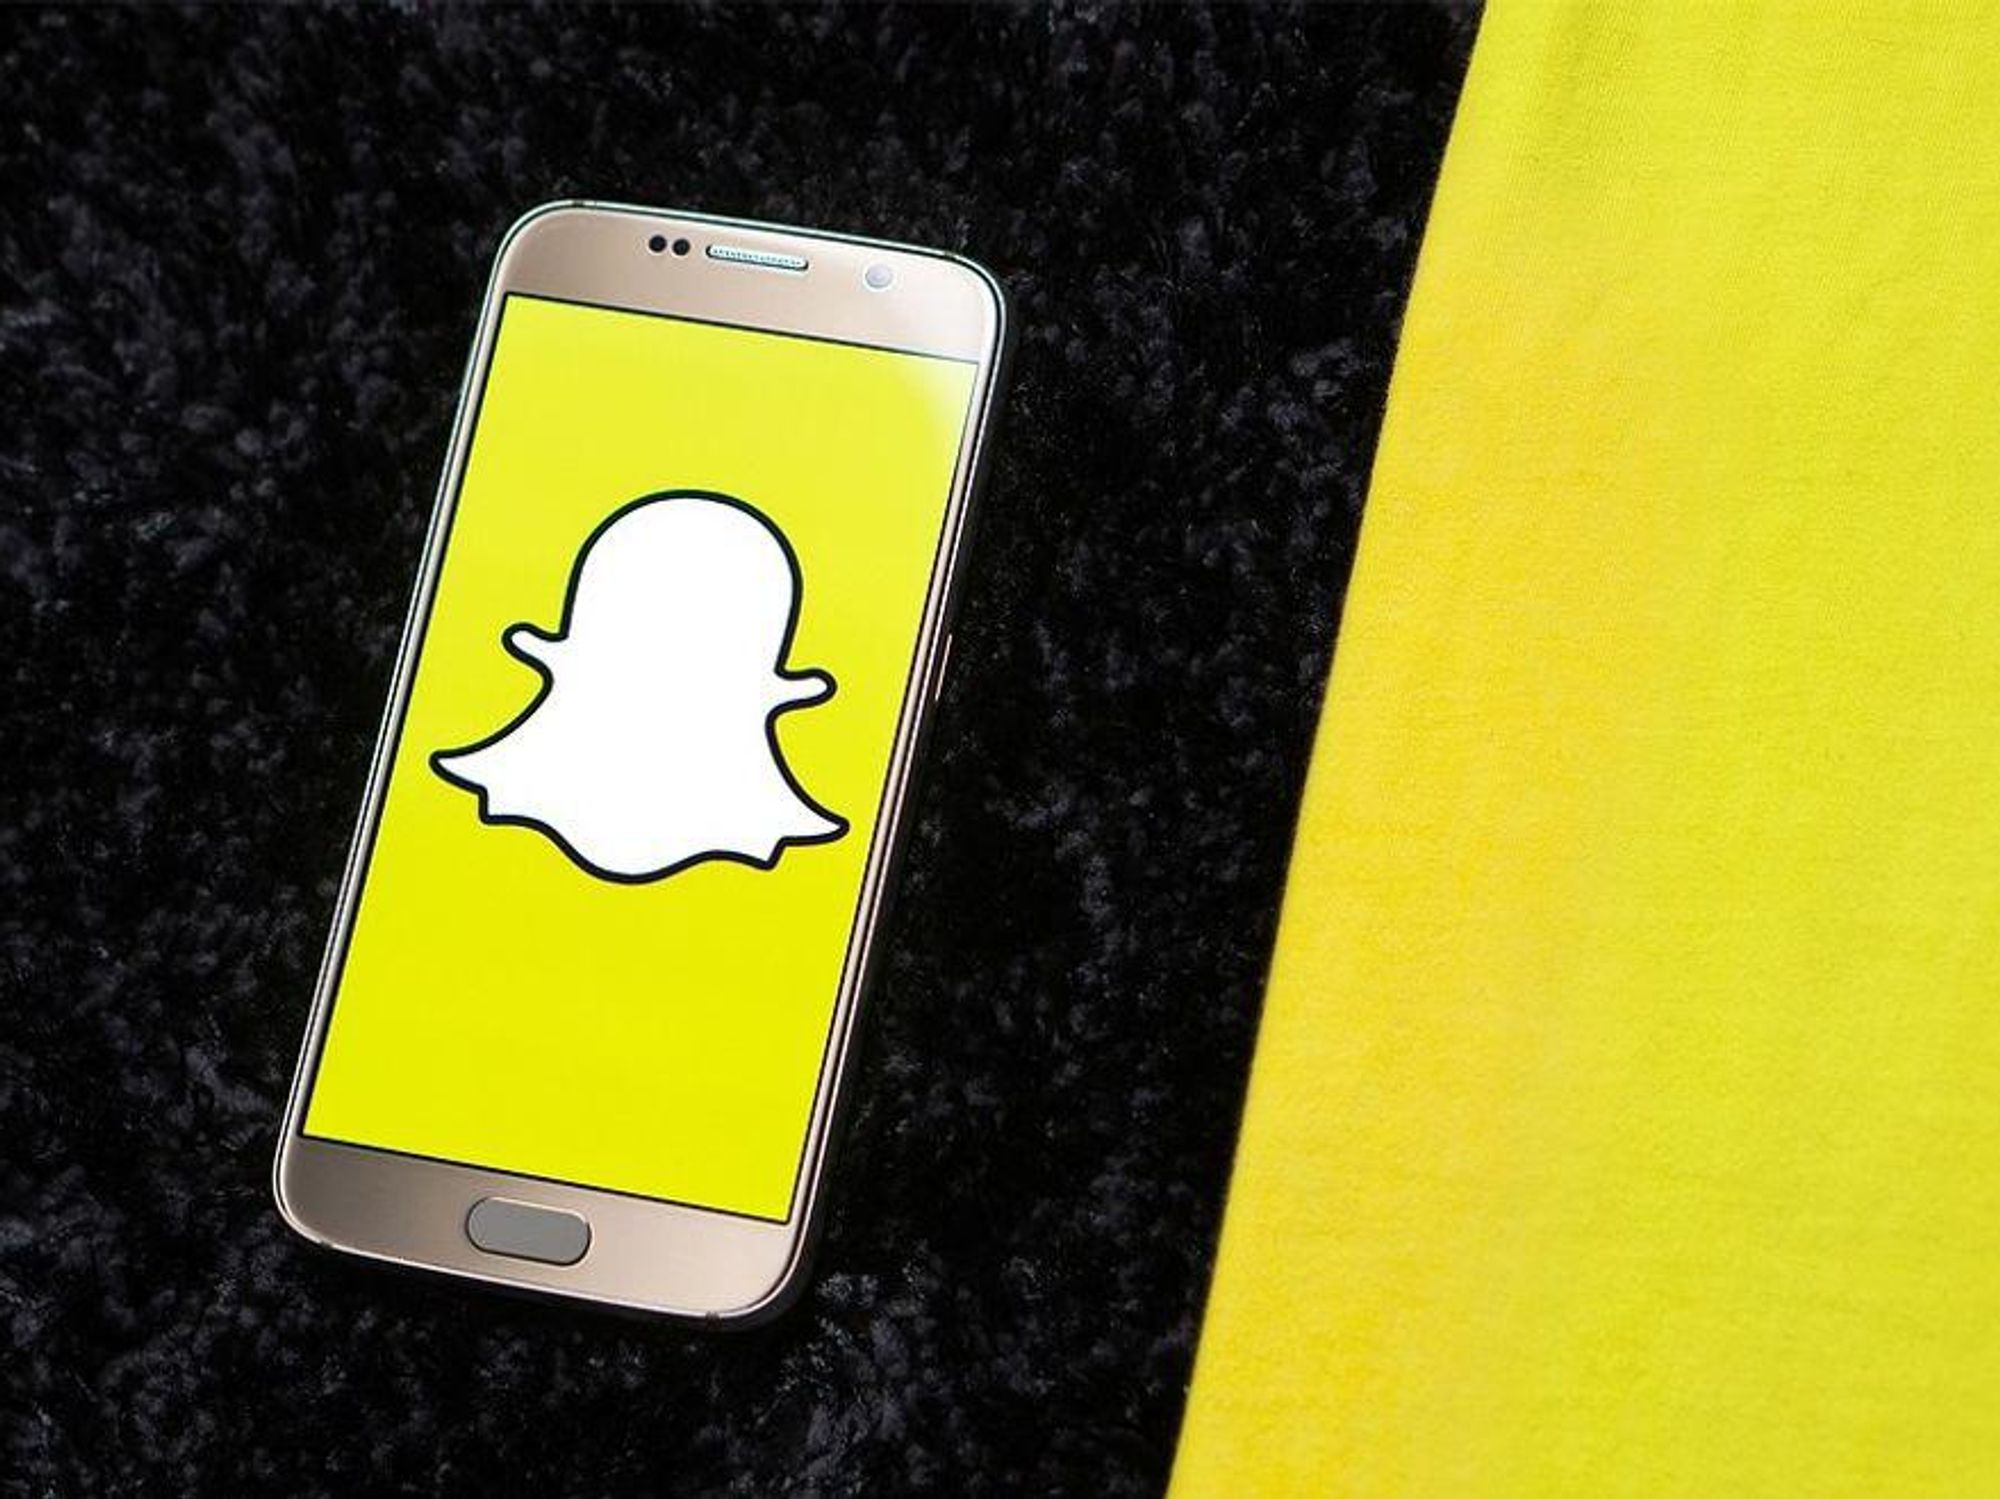 Snap Executive Tells Congress Banning Snapchat Drug Sales Is Their 'Top Priority'